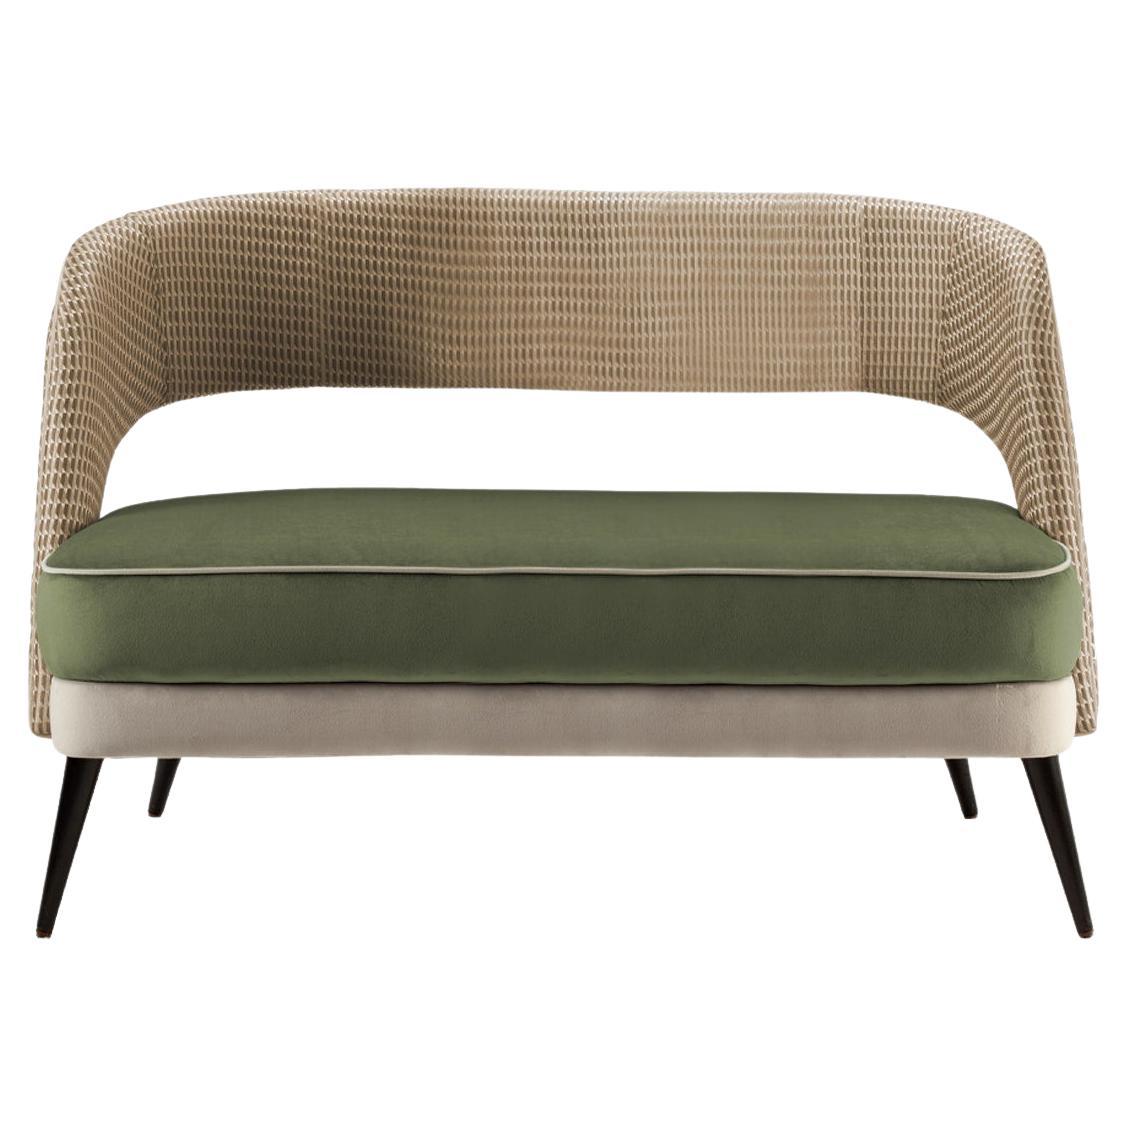 Ava Settee 3-Seat Olive Green Seat and Textured Fabric Backrest Wooden Feet